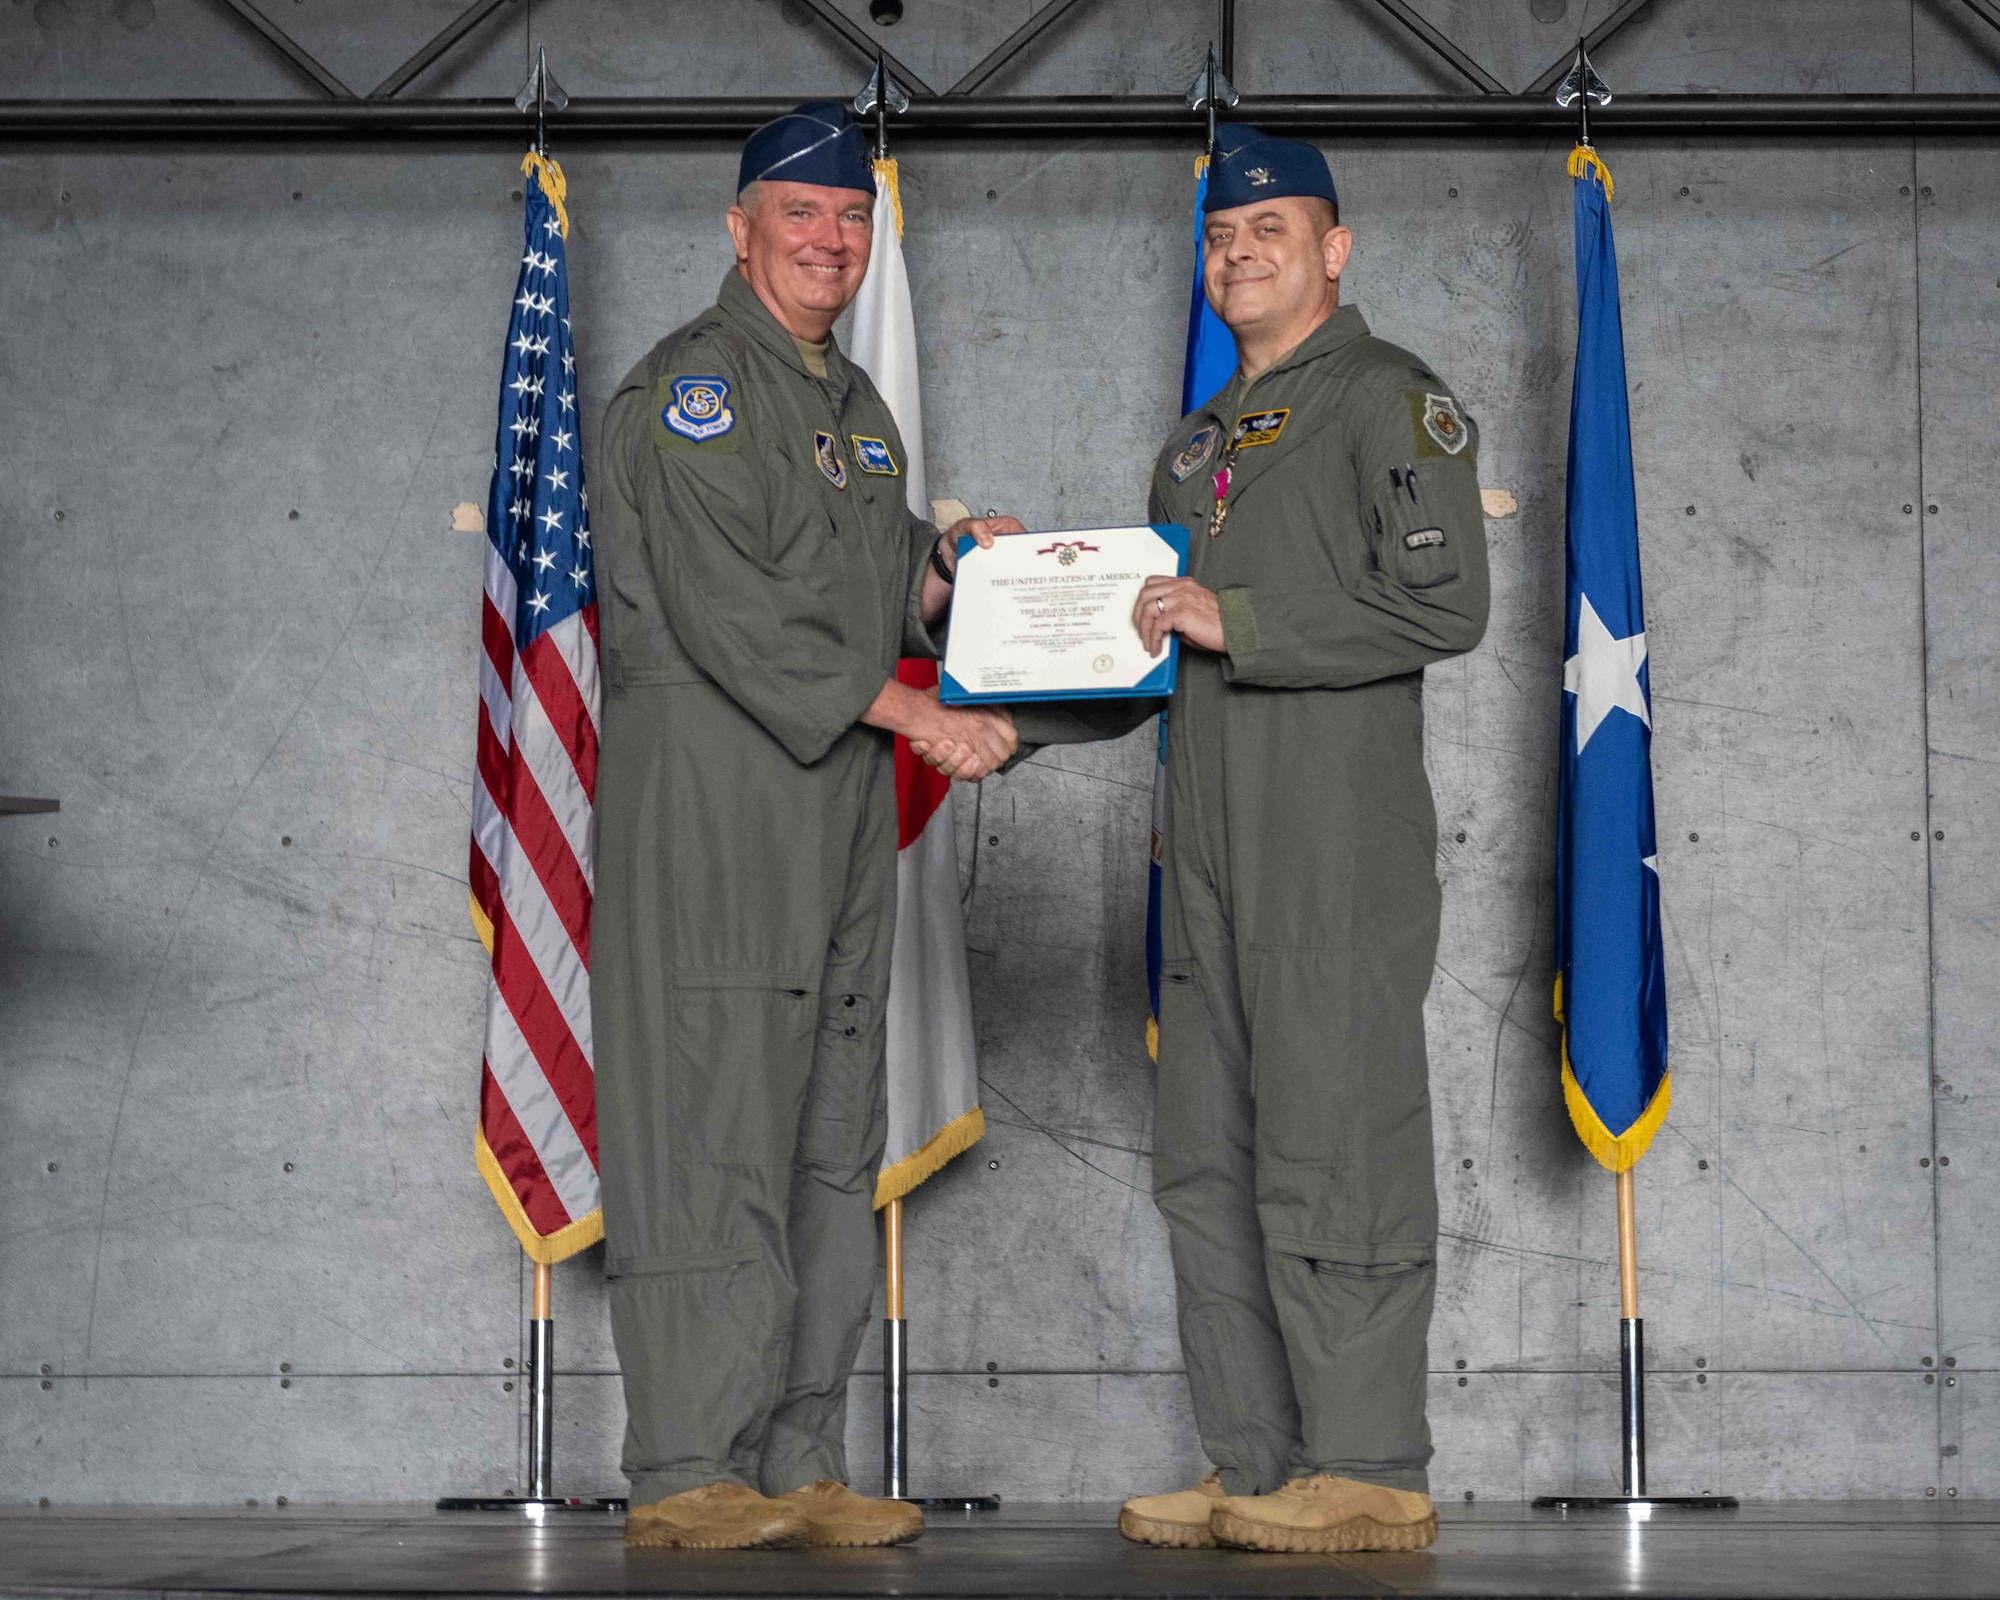 United States Air Force Lt. Gen. Ricky N. Rupp, U.S. Forces Japan and 5th Air Force commander, left, presents the Legion of Merit to Col. Jesse J. Friedel, 35th Fighter Wing (FW) outgoing commander, during the 35th FW change of command ceremony at Misawa Air Base, Japan, June 30, 2022.